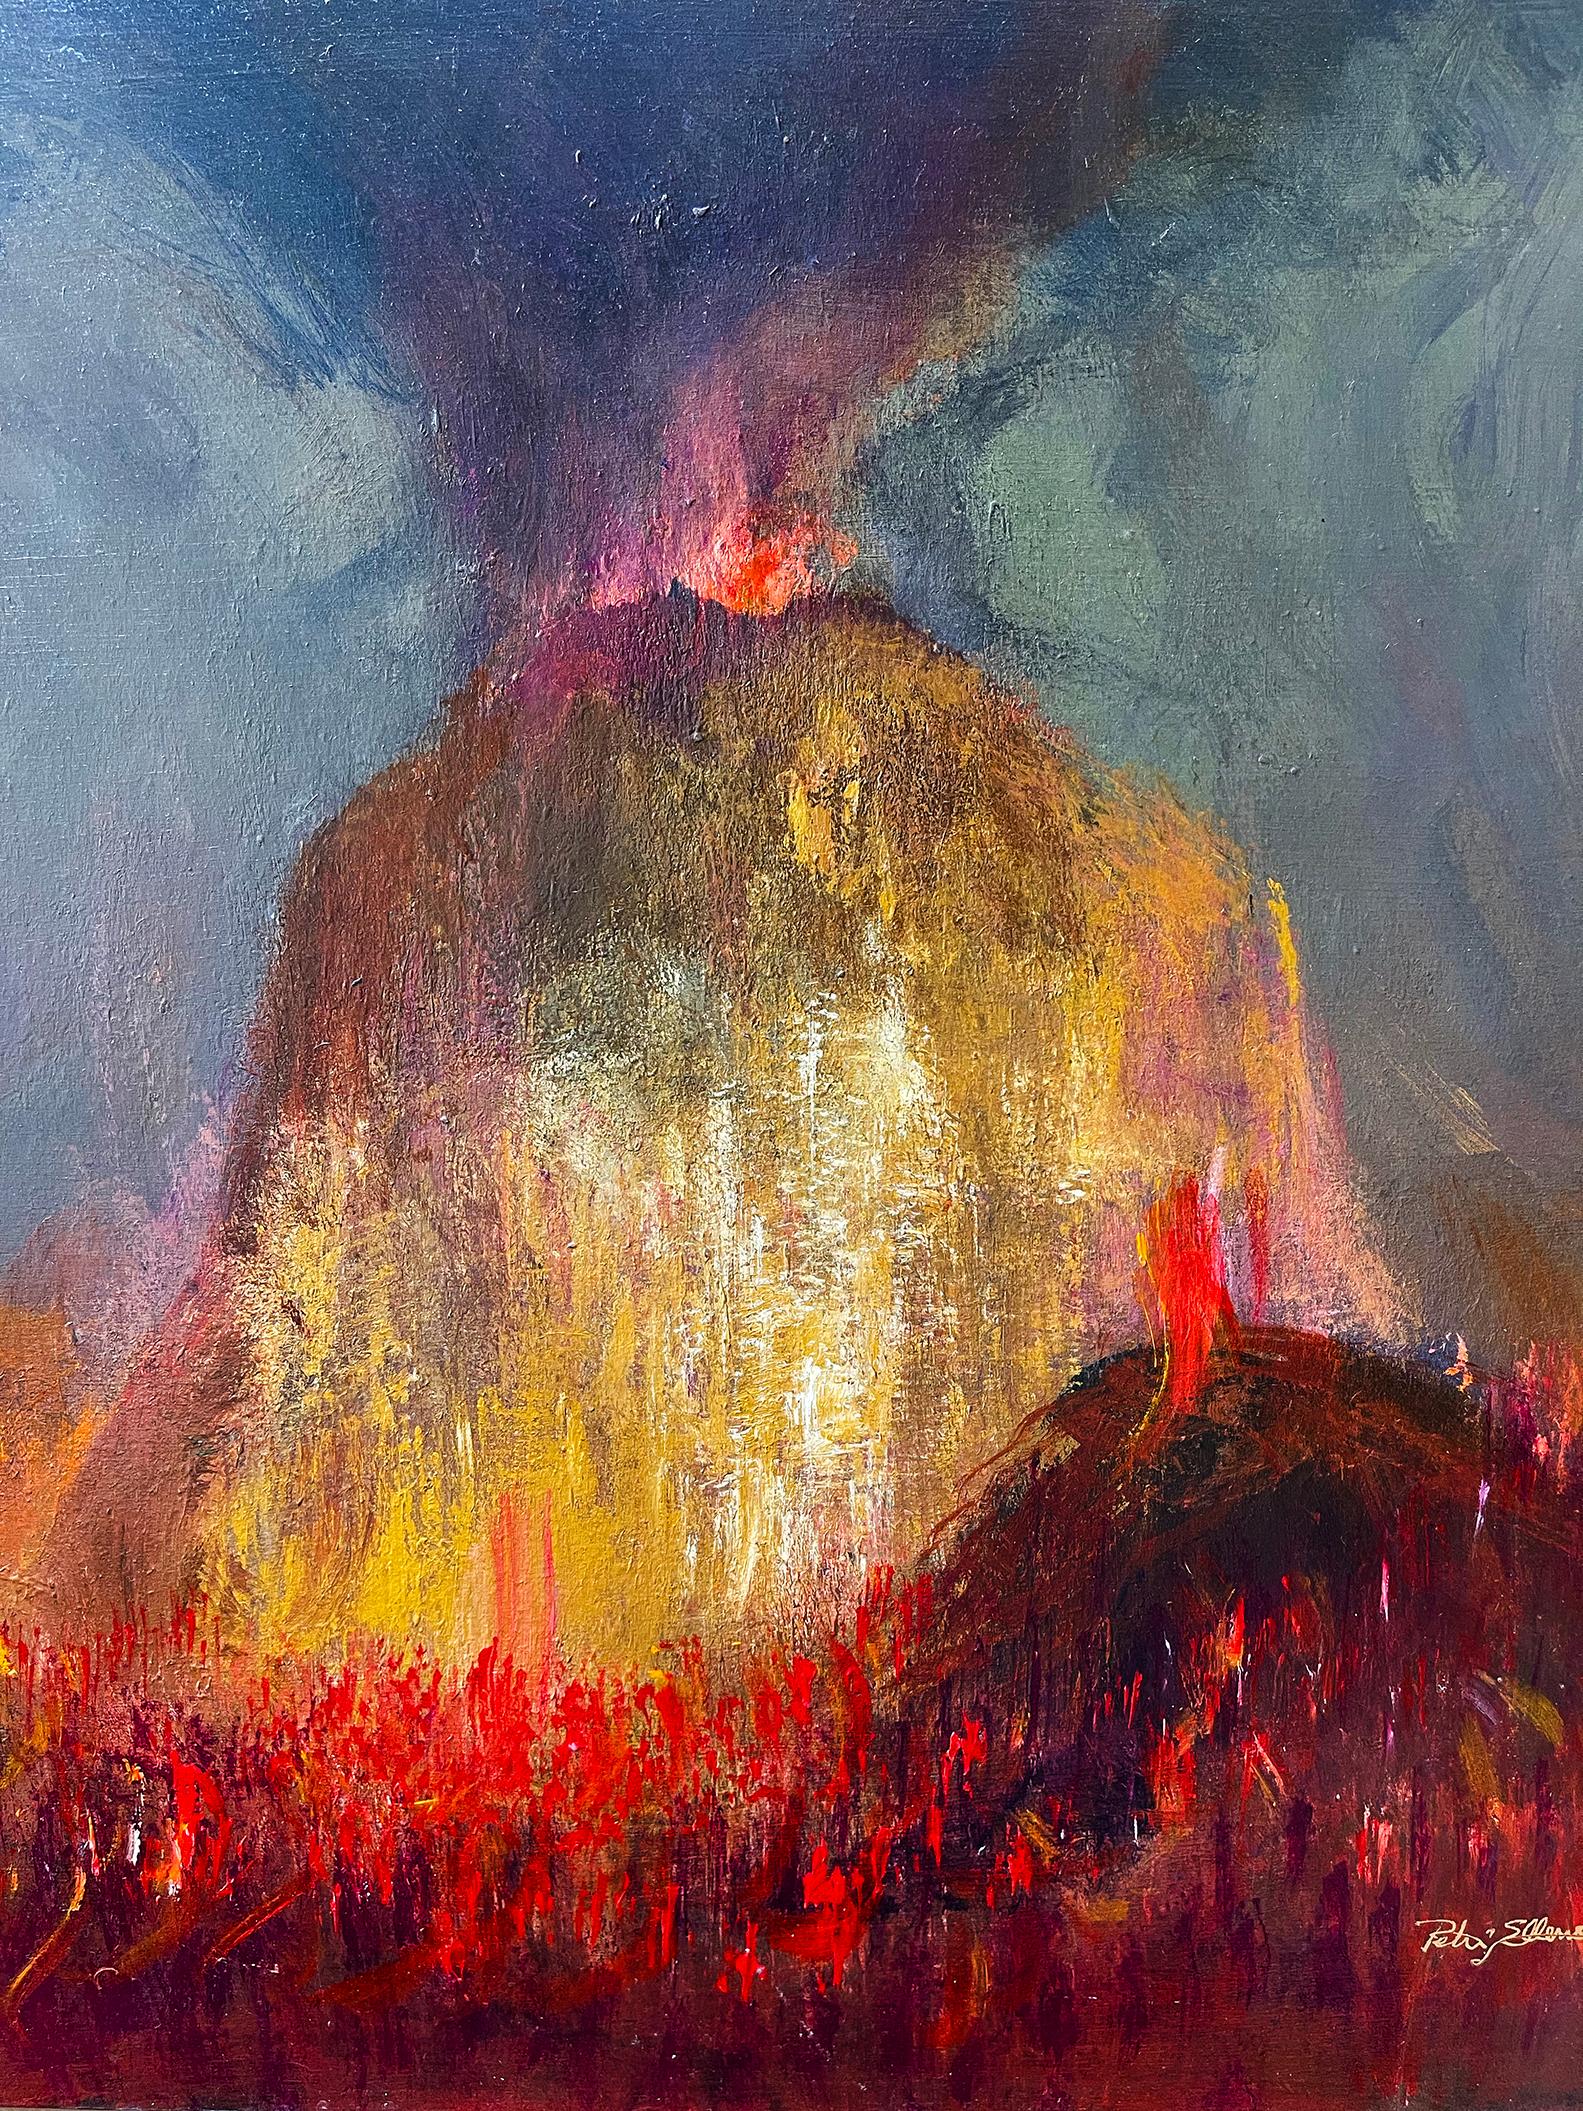 Volcano Eruption - Explosive Fire Lava Flow from Hell - Surrealist Painting by Peter Ellenshaw